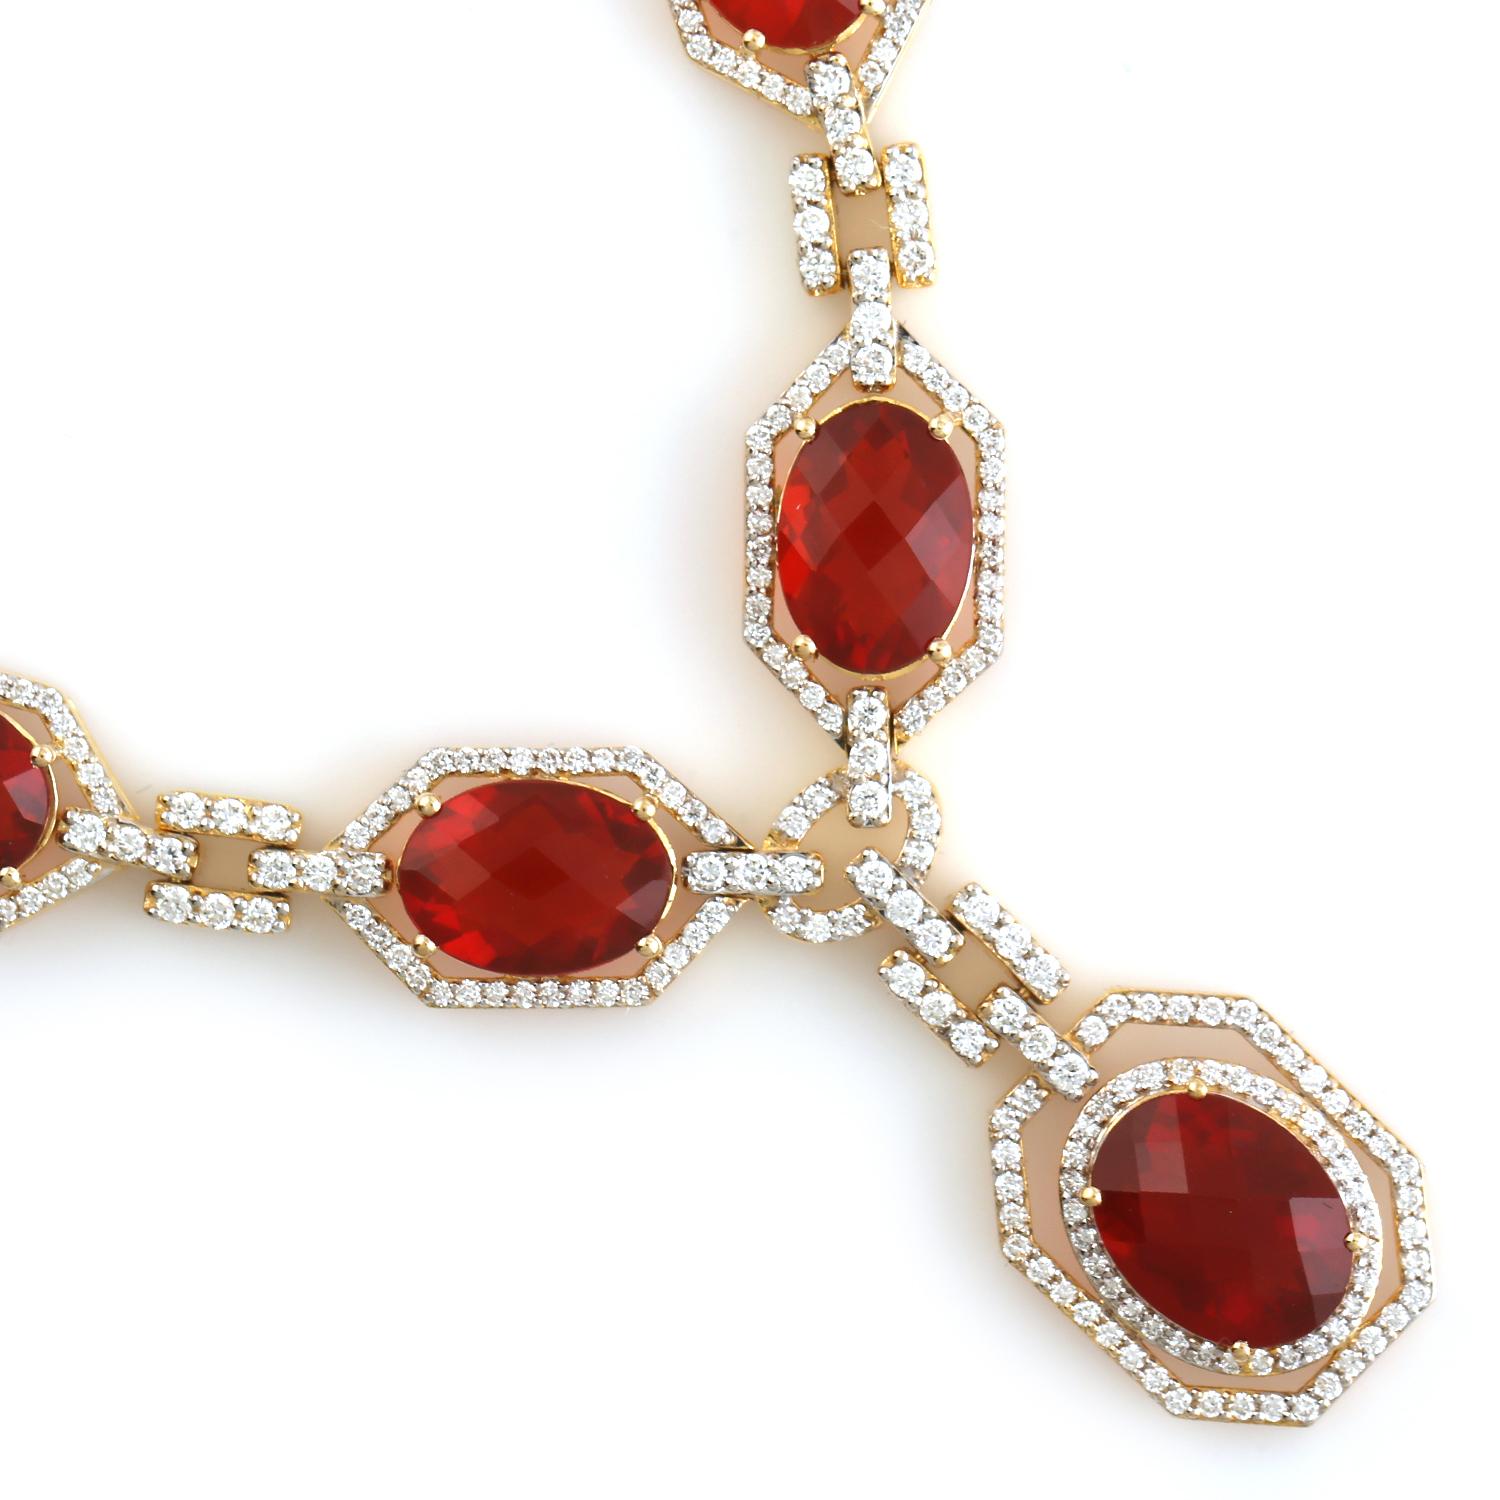 Mixed Cut Oval Shaped Fire Opal Chain Necklace With Pave Diamonds In 18k Yellow Gold For Sale